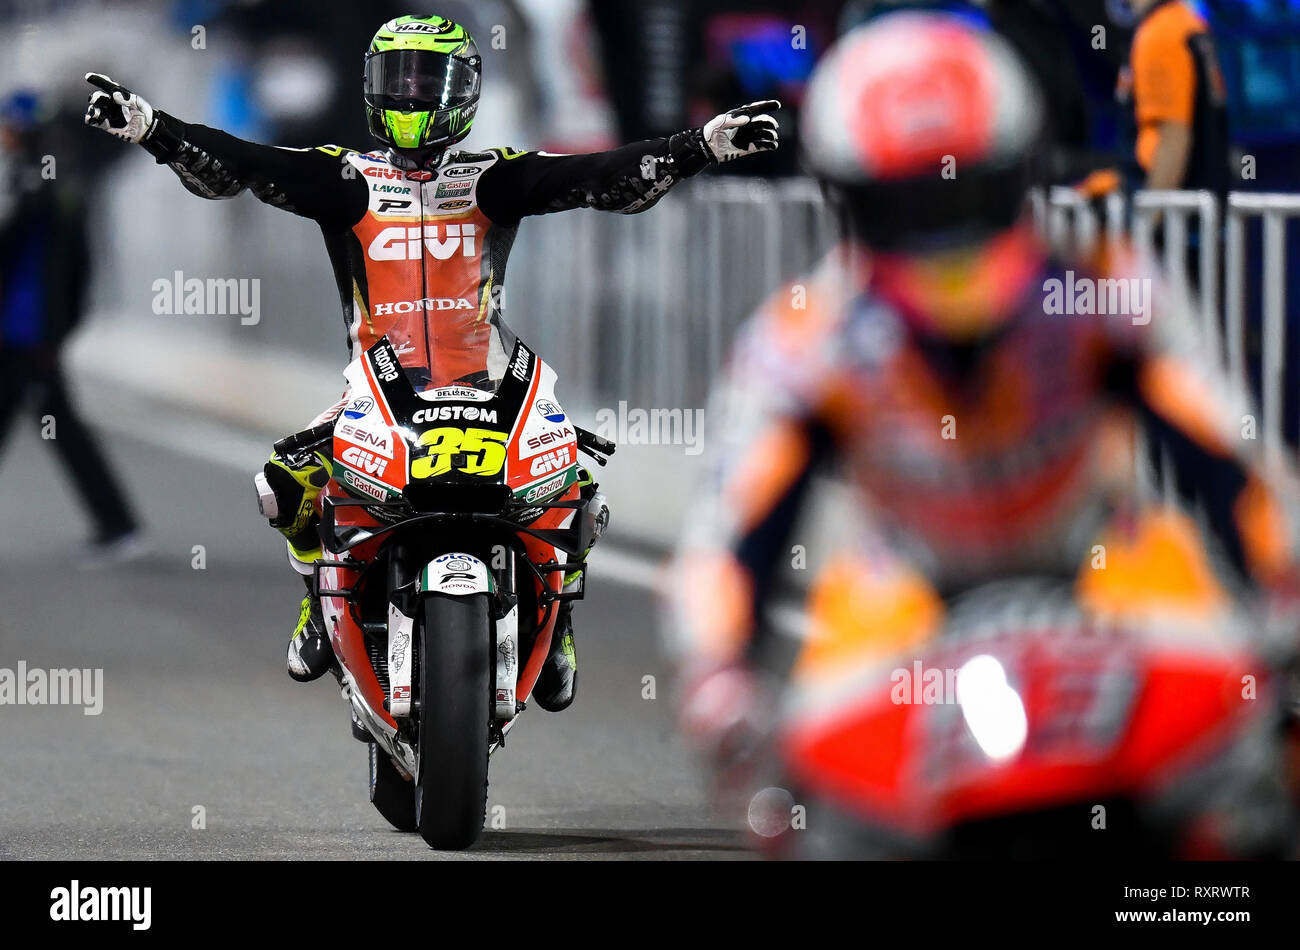 Doha, Qatar. 10th Mar, 2019. LCR Honda team's British rider Cal Crutchlow celebrates after the MotoGP race of the 2019 MotoGP Grand Prix of Qatar in Losail Circuit of Doha, capital of Qatar, on March 10, 2019. Cal Crutchlow took the third place with 42 minutes and 37.222 seconds. Credit: Nikku/Xinhua/Alamy Live News Stock Photo